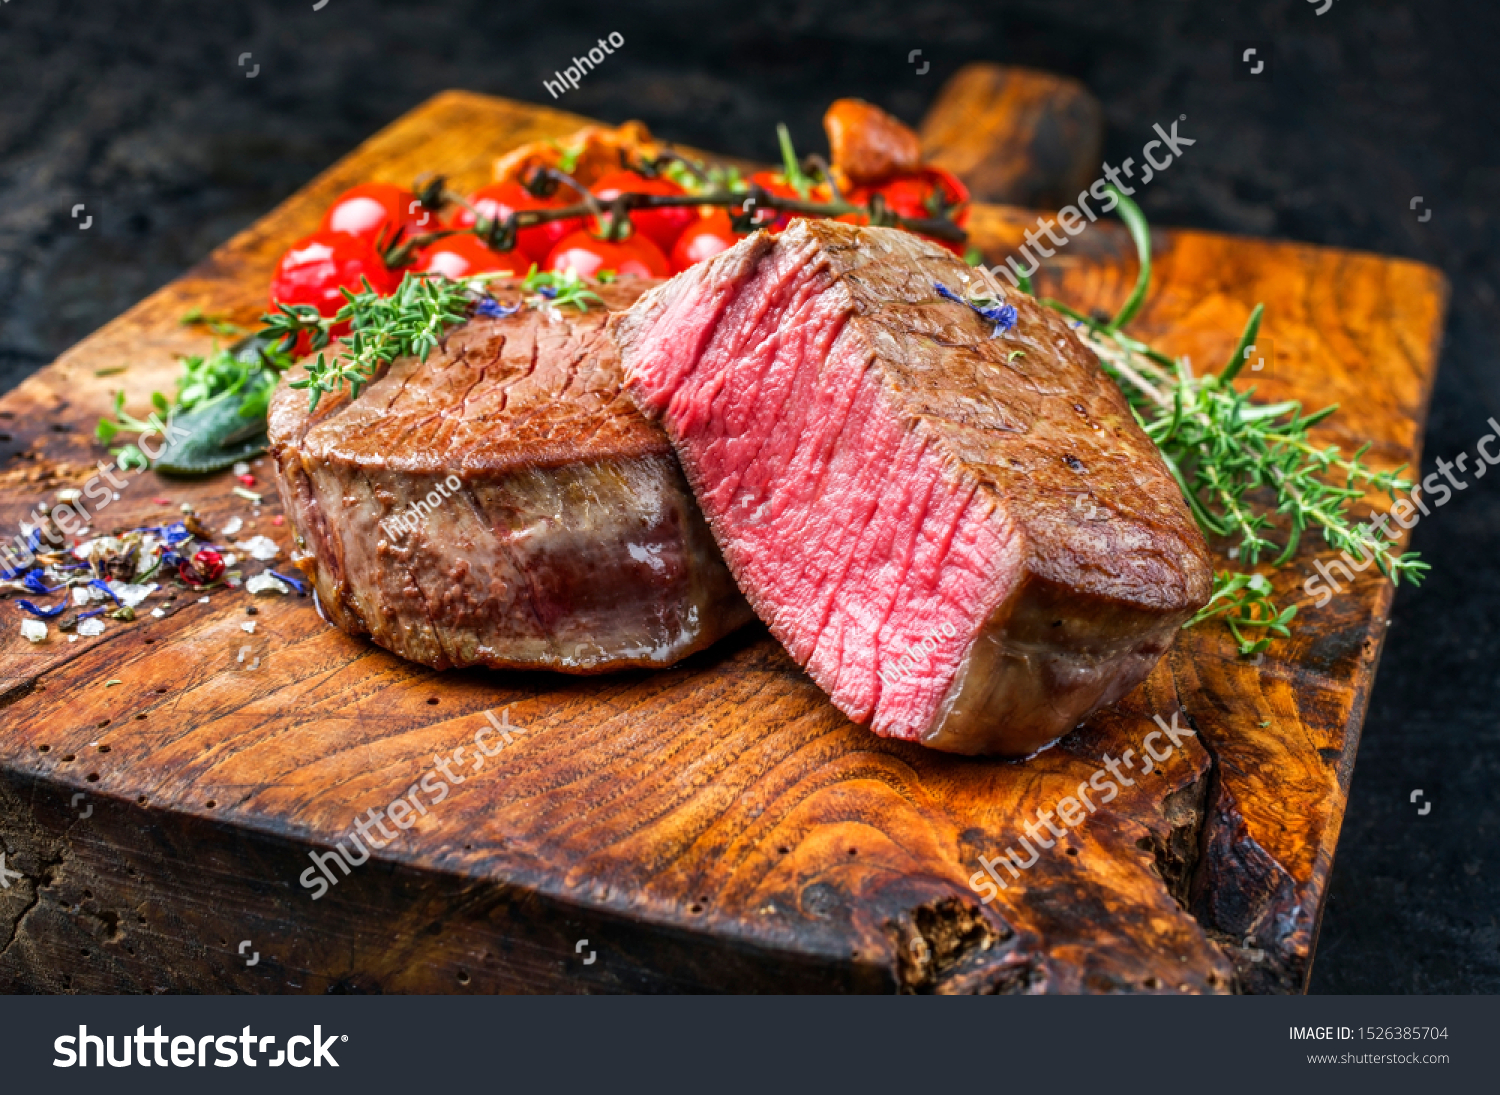 Fried dry aged beef fillet medallion steak natural with tomatoes and herbs as closeup on a wooden cutting board  #1526385704